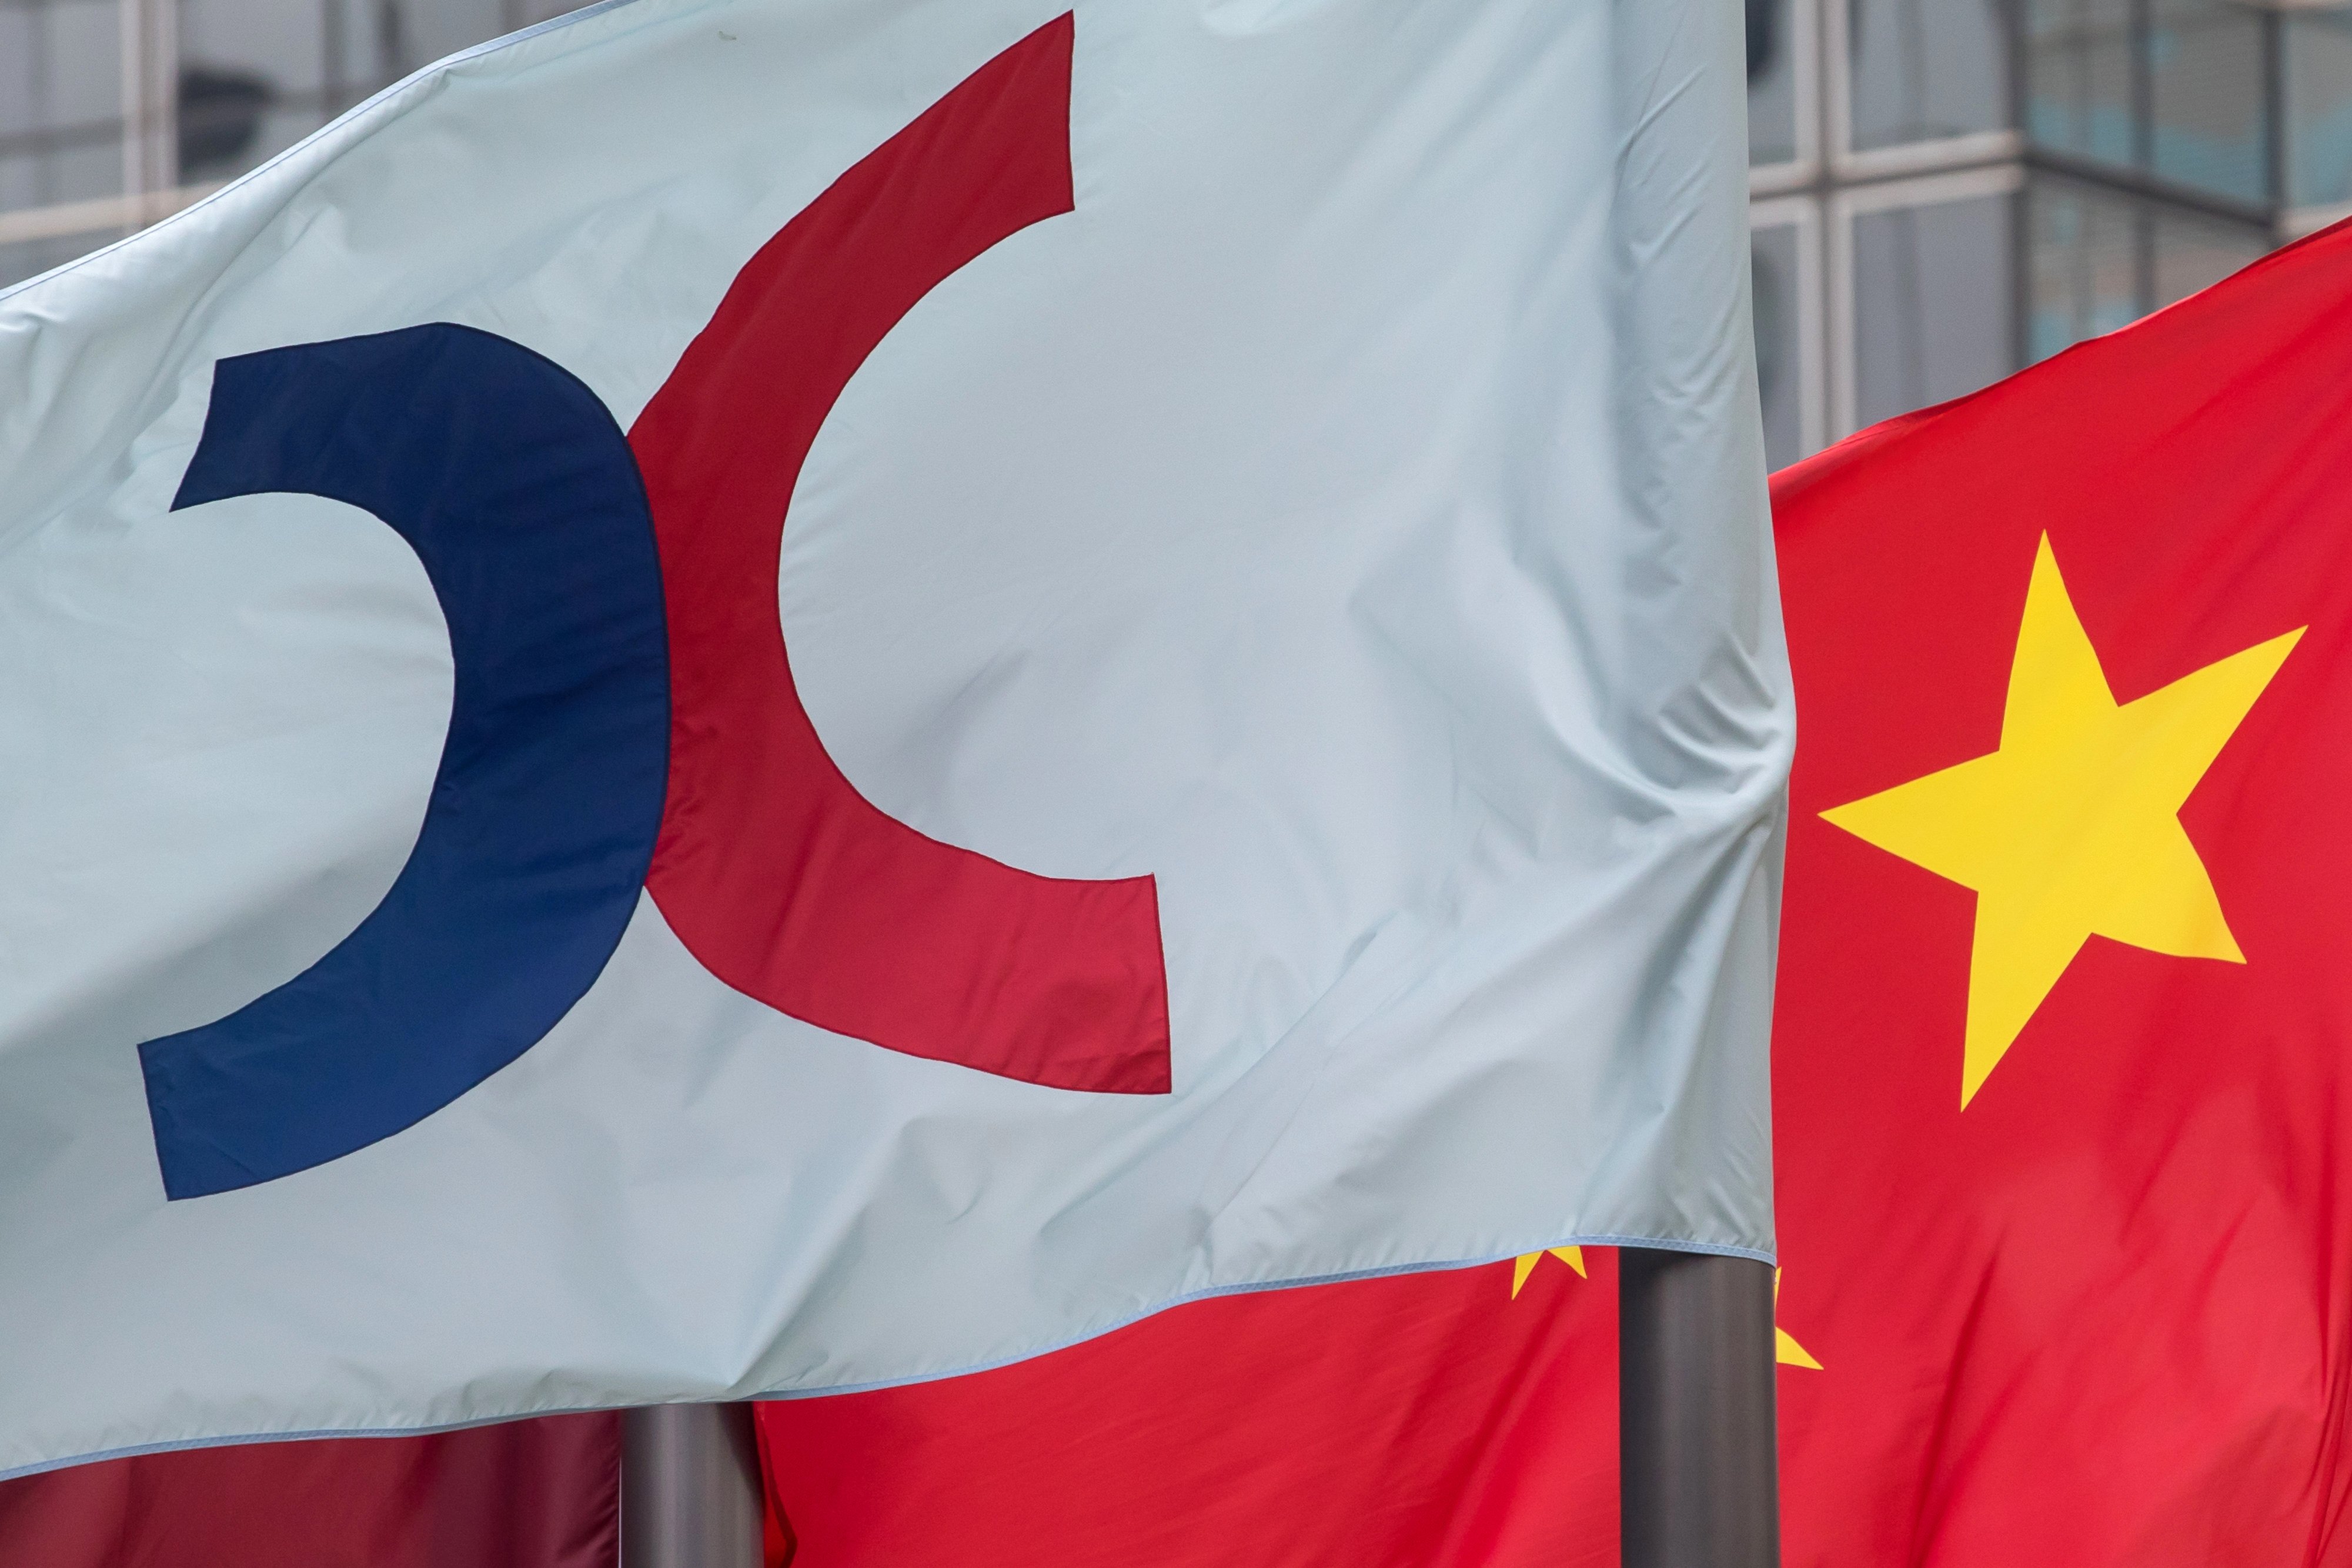 The corporate flag for Hong Kong Exchanges & Clearing (HKEX) and the Chinese flag fly outside the Exchange Square complex. Photo: Bloomberg